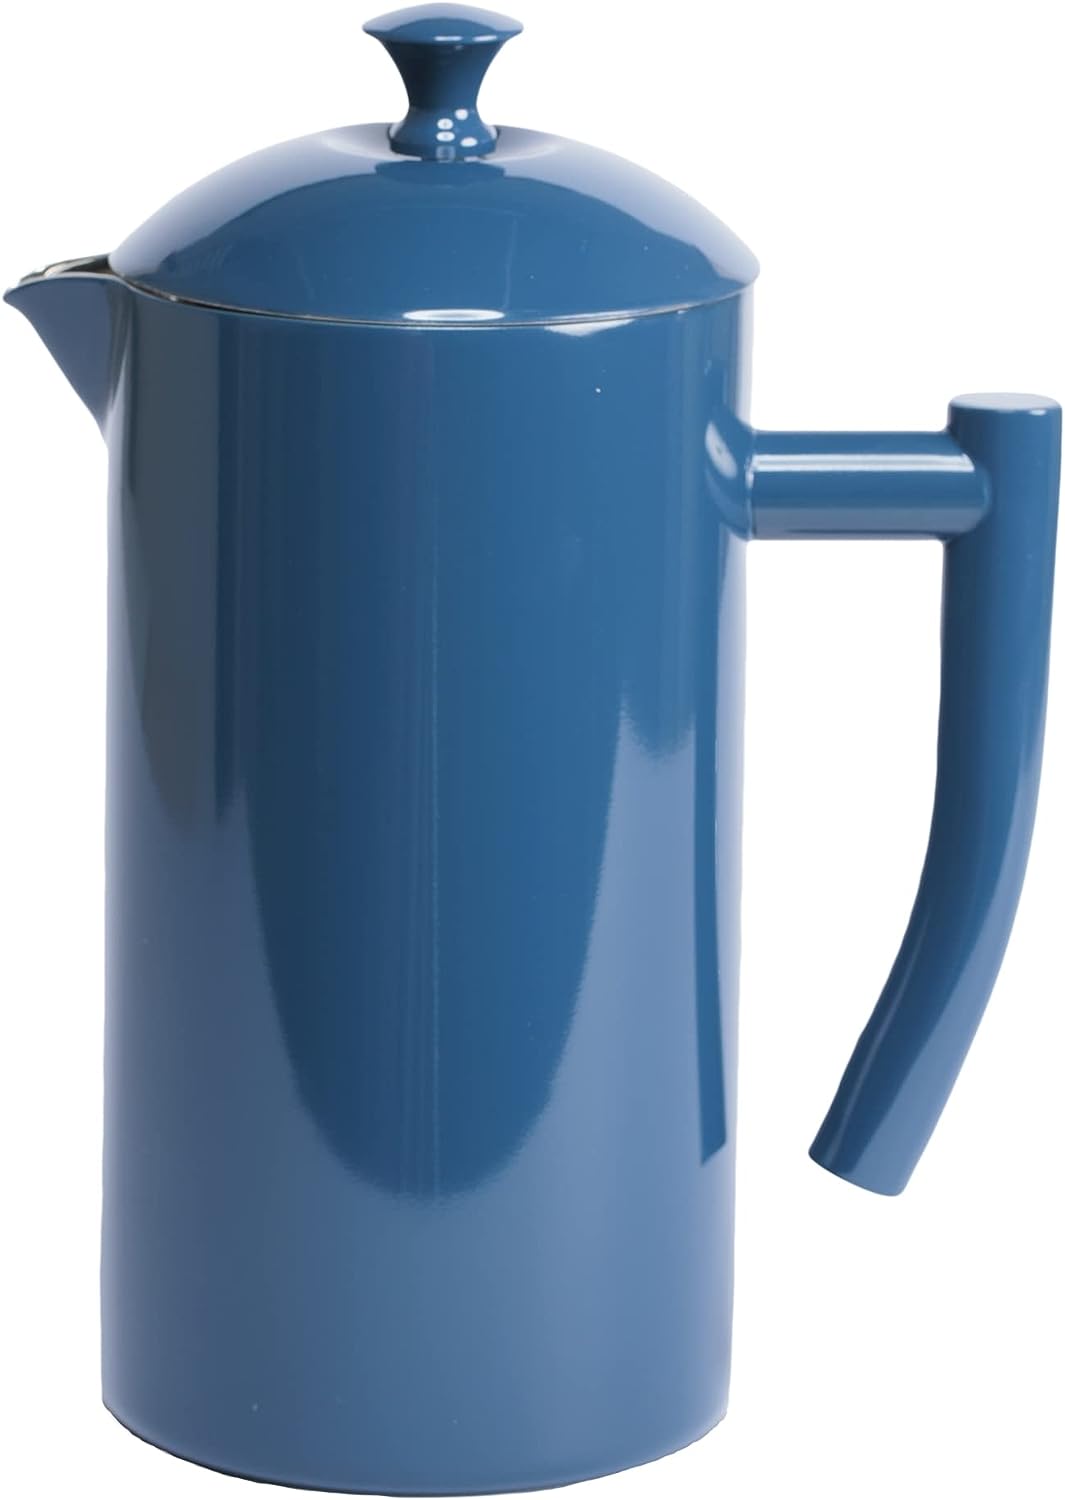 Frieling Double-Walled Stainless Steel French Press Coffee Maker, Navy, 34 fl oz.